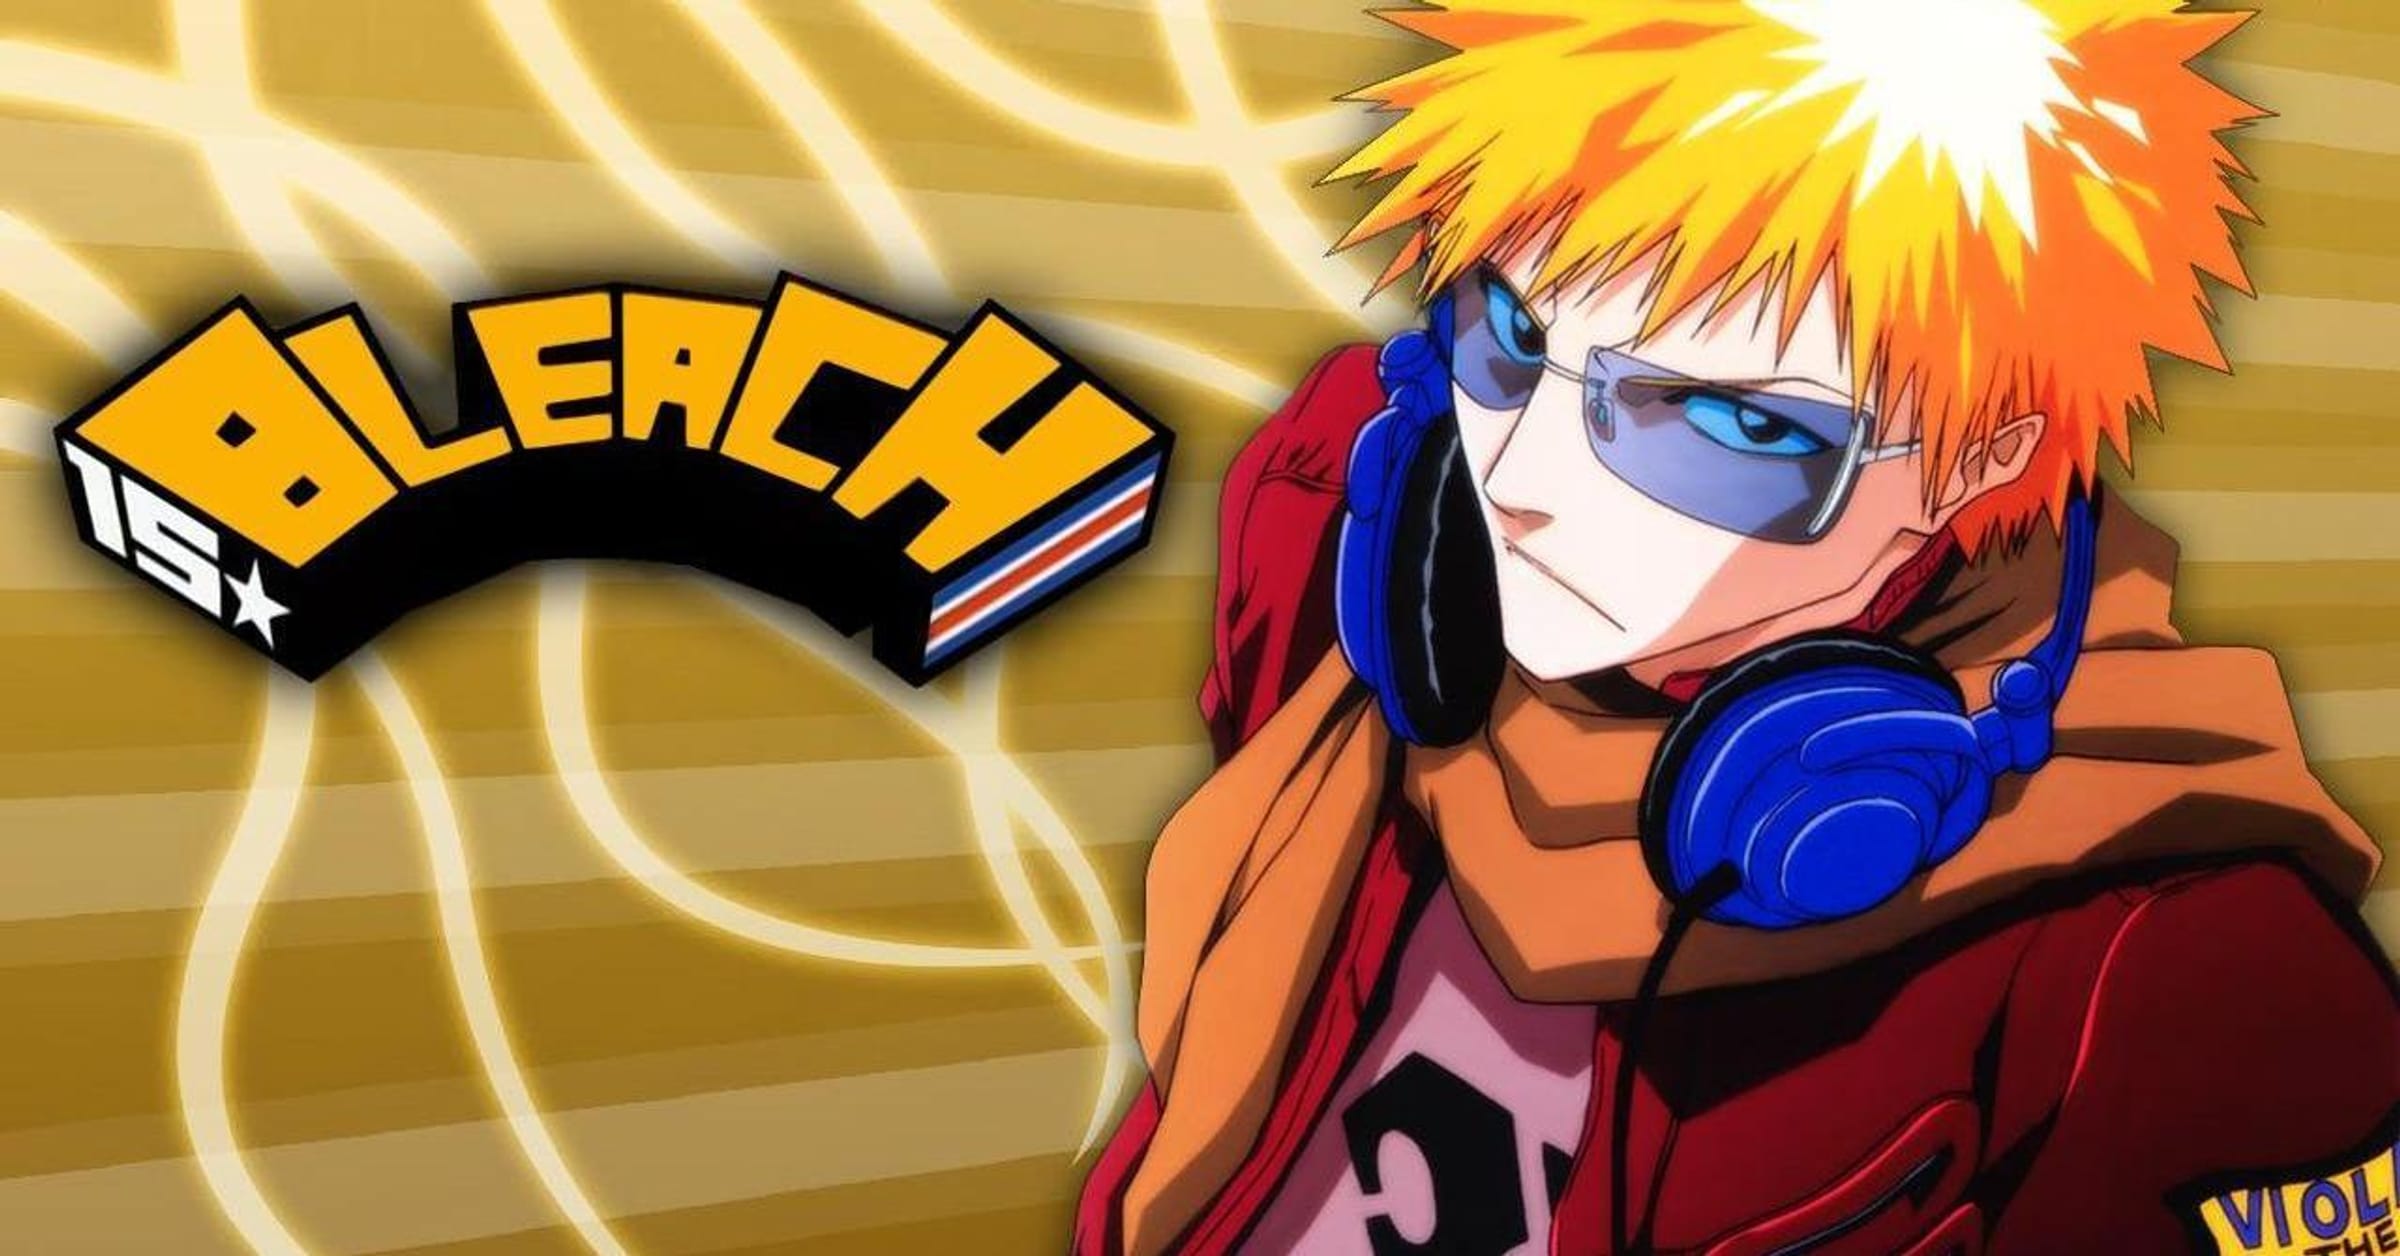 15 Best Naruto Opening Songs, Ranked